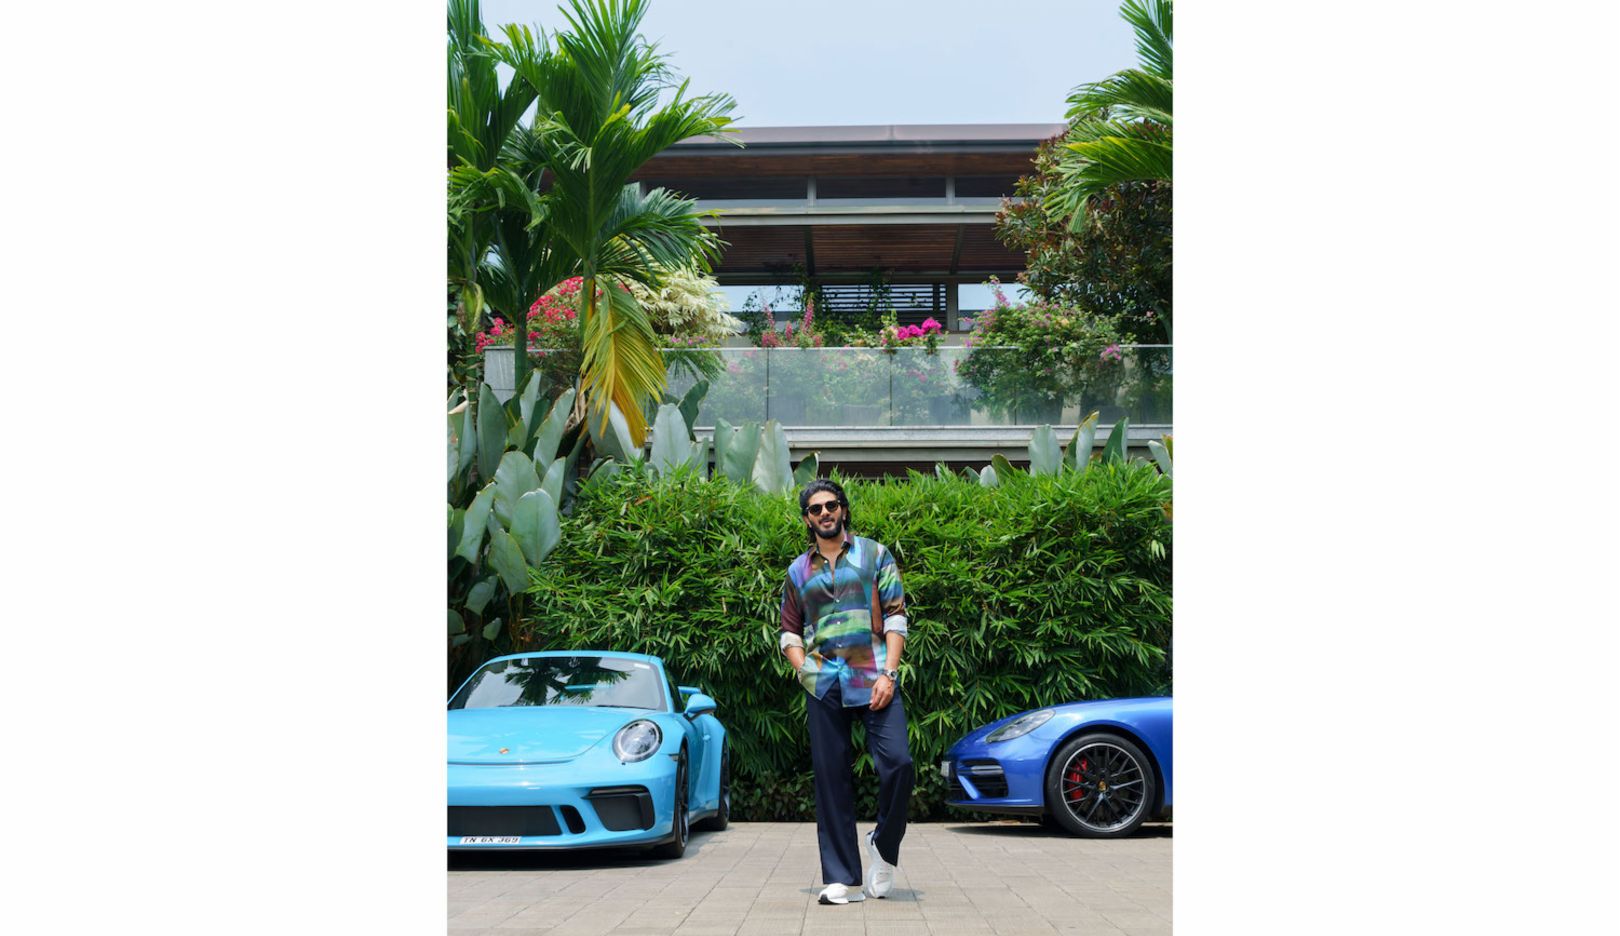 All around the house, the picture is dominated by native plants – and Salmaan’s Porsche sports cars. 